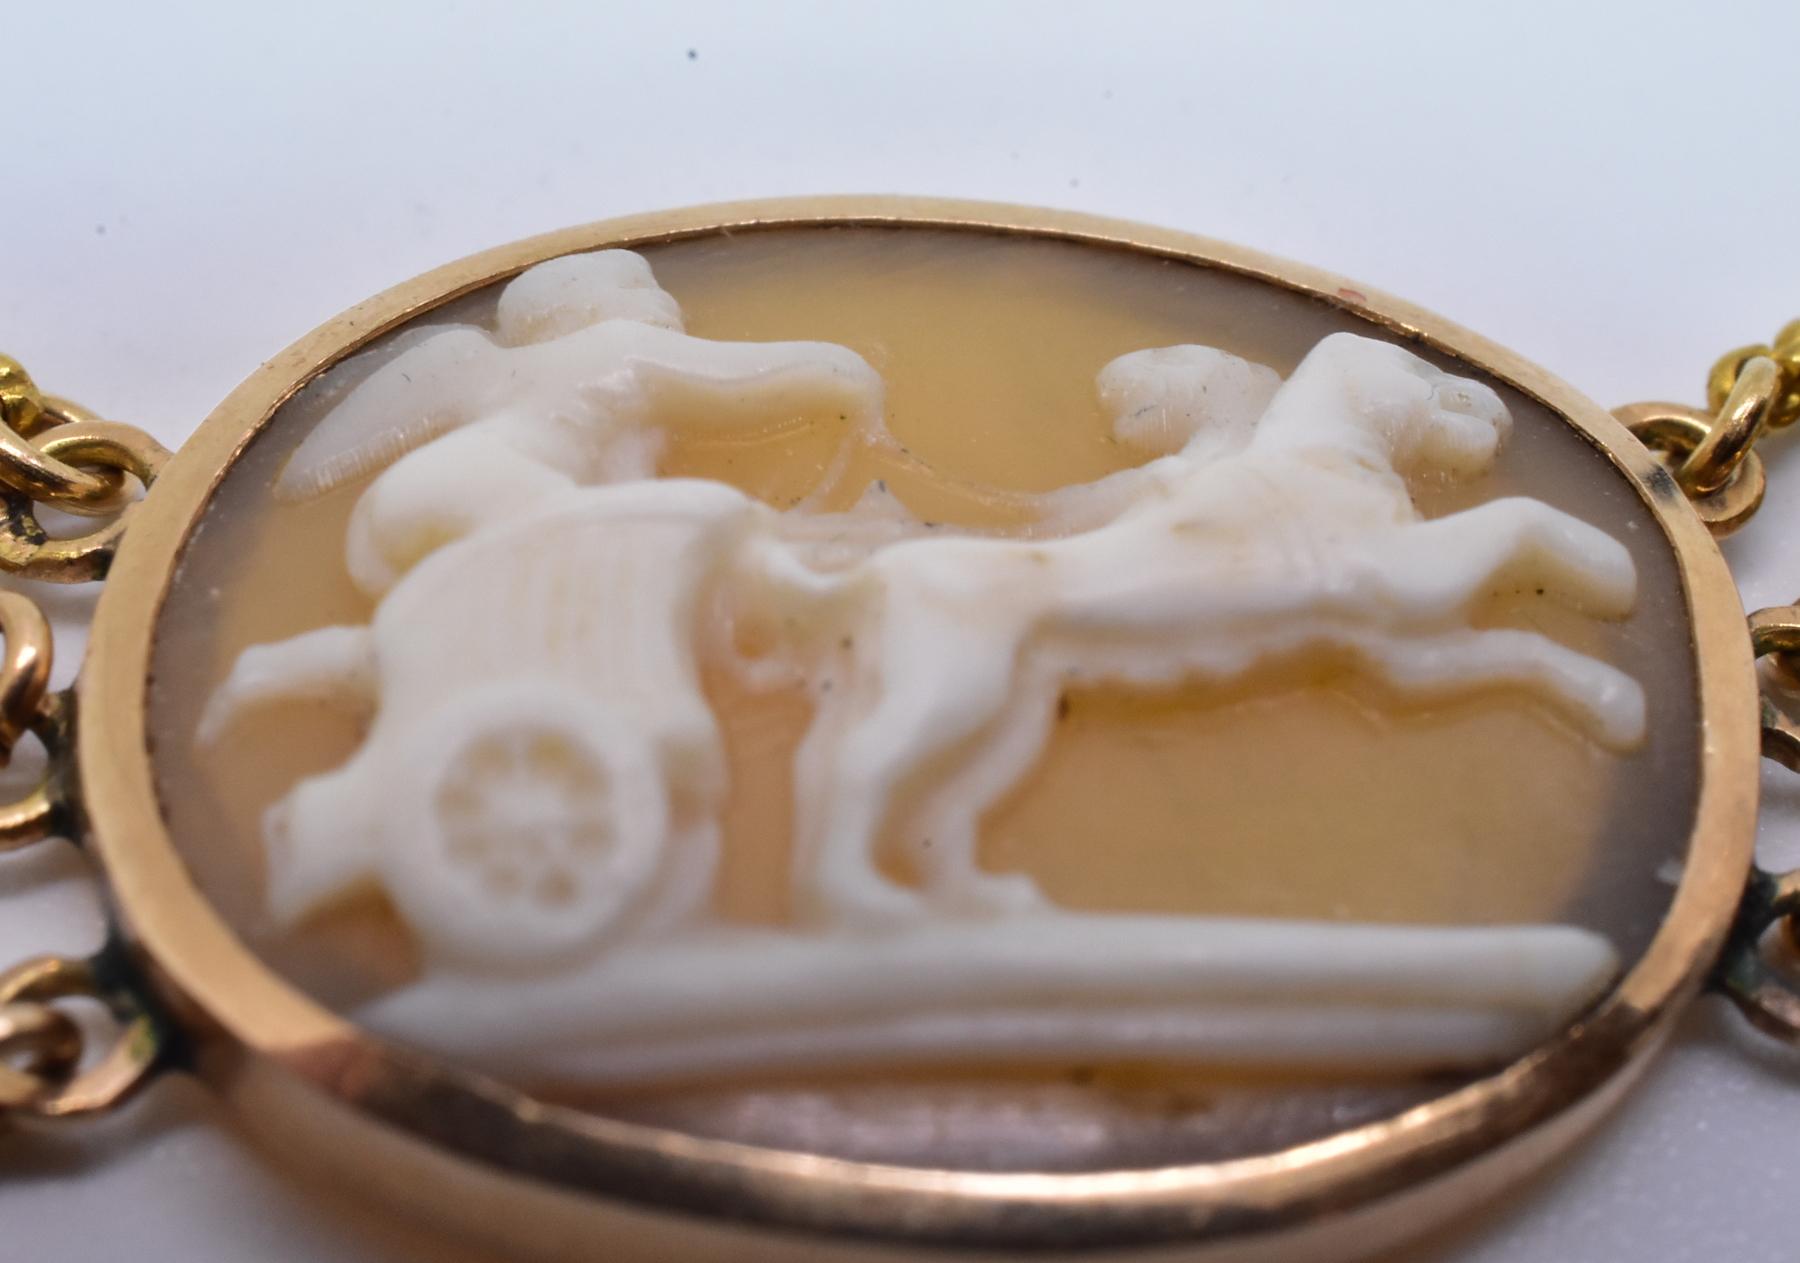 Women's Shell Cameo Swag Necklace with Scenes of Cupid (Eros), circa 1820